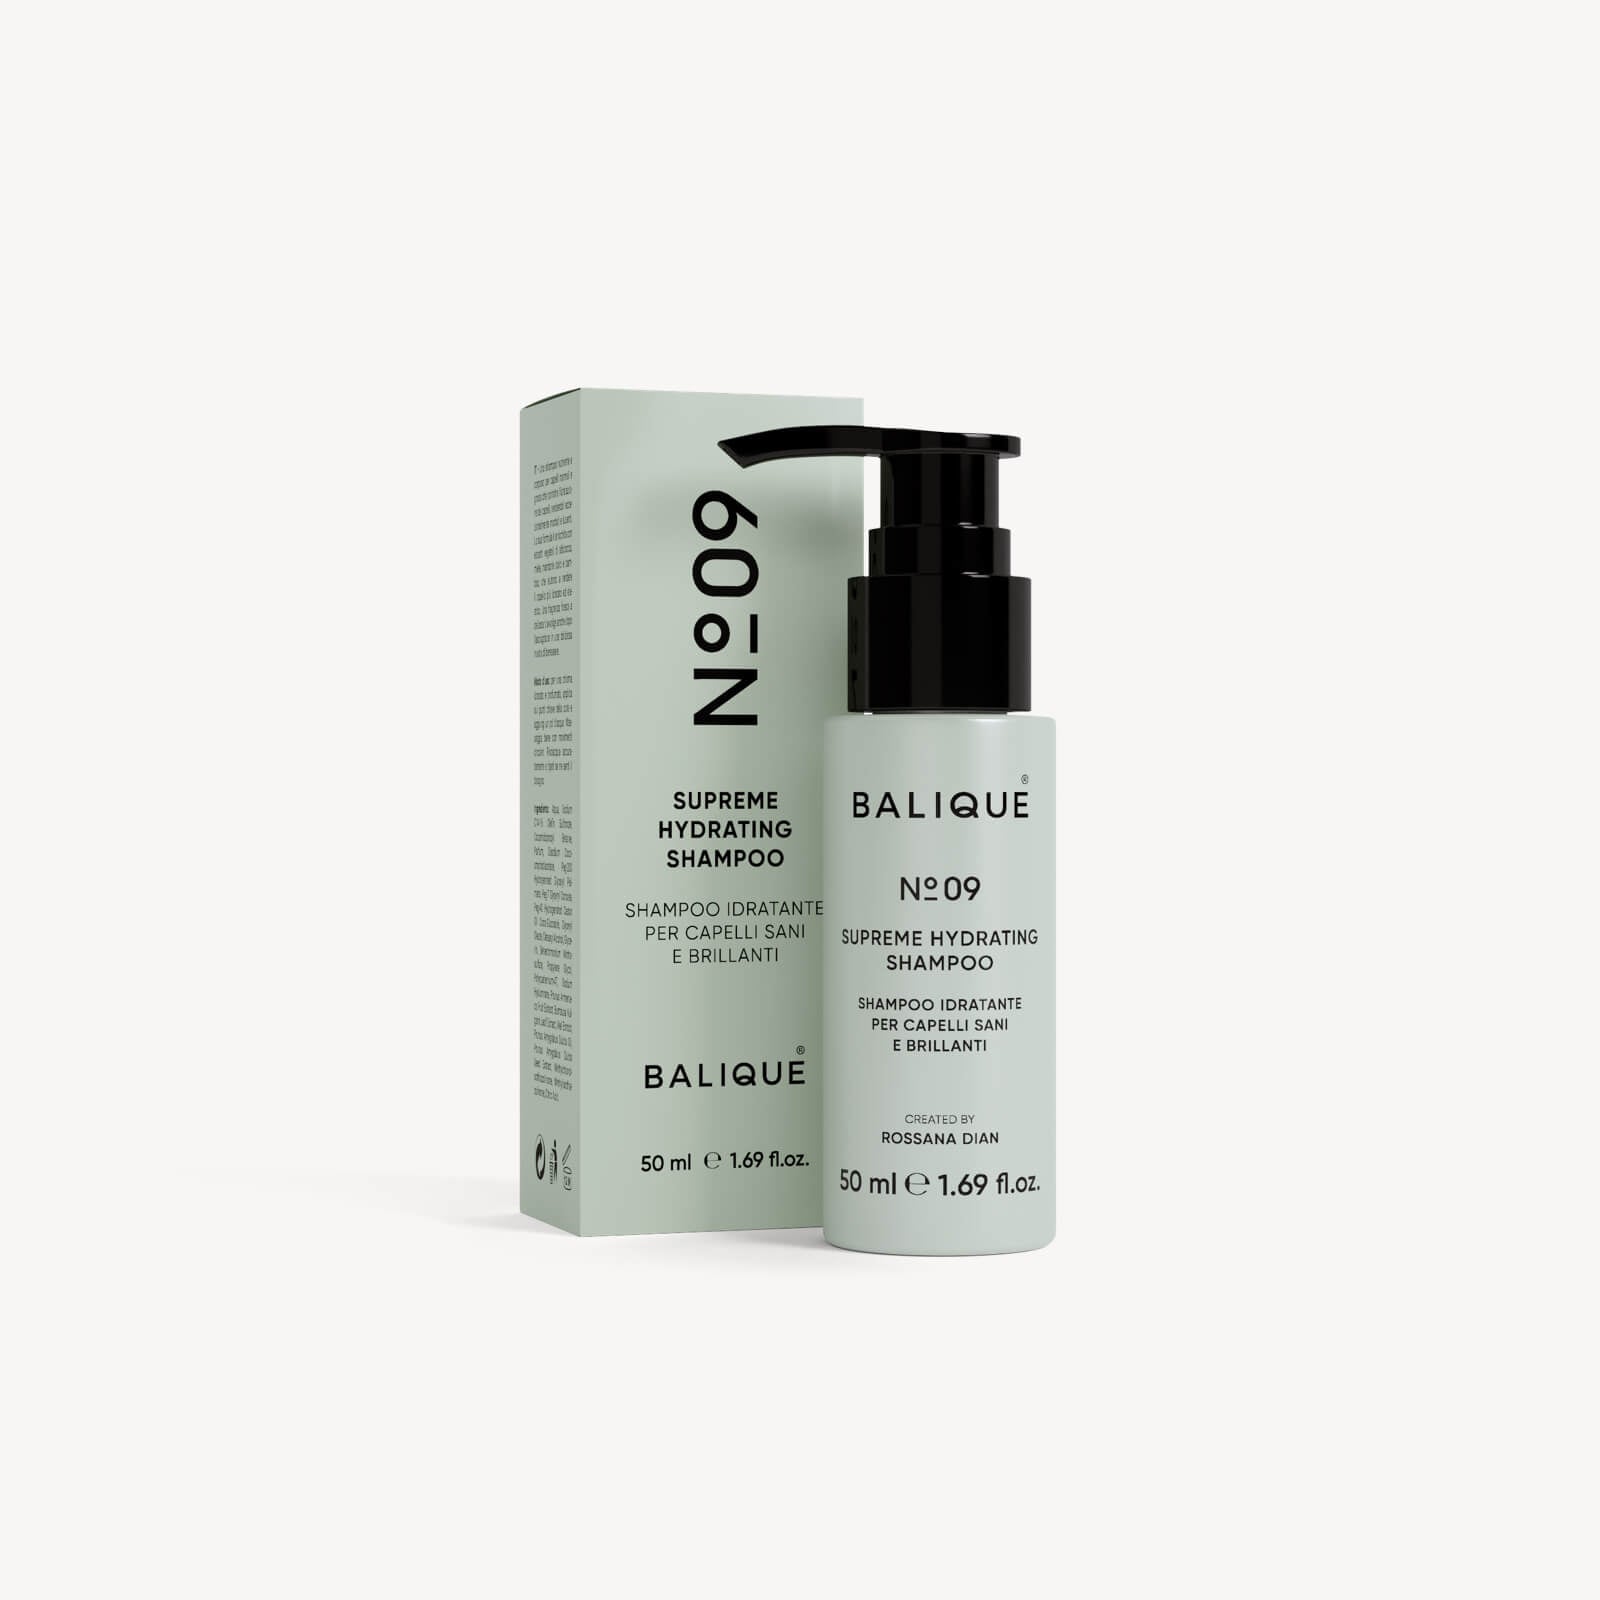 BOX 02 - TRAVEL SIZE - Treated hair - Complete treatment